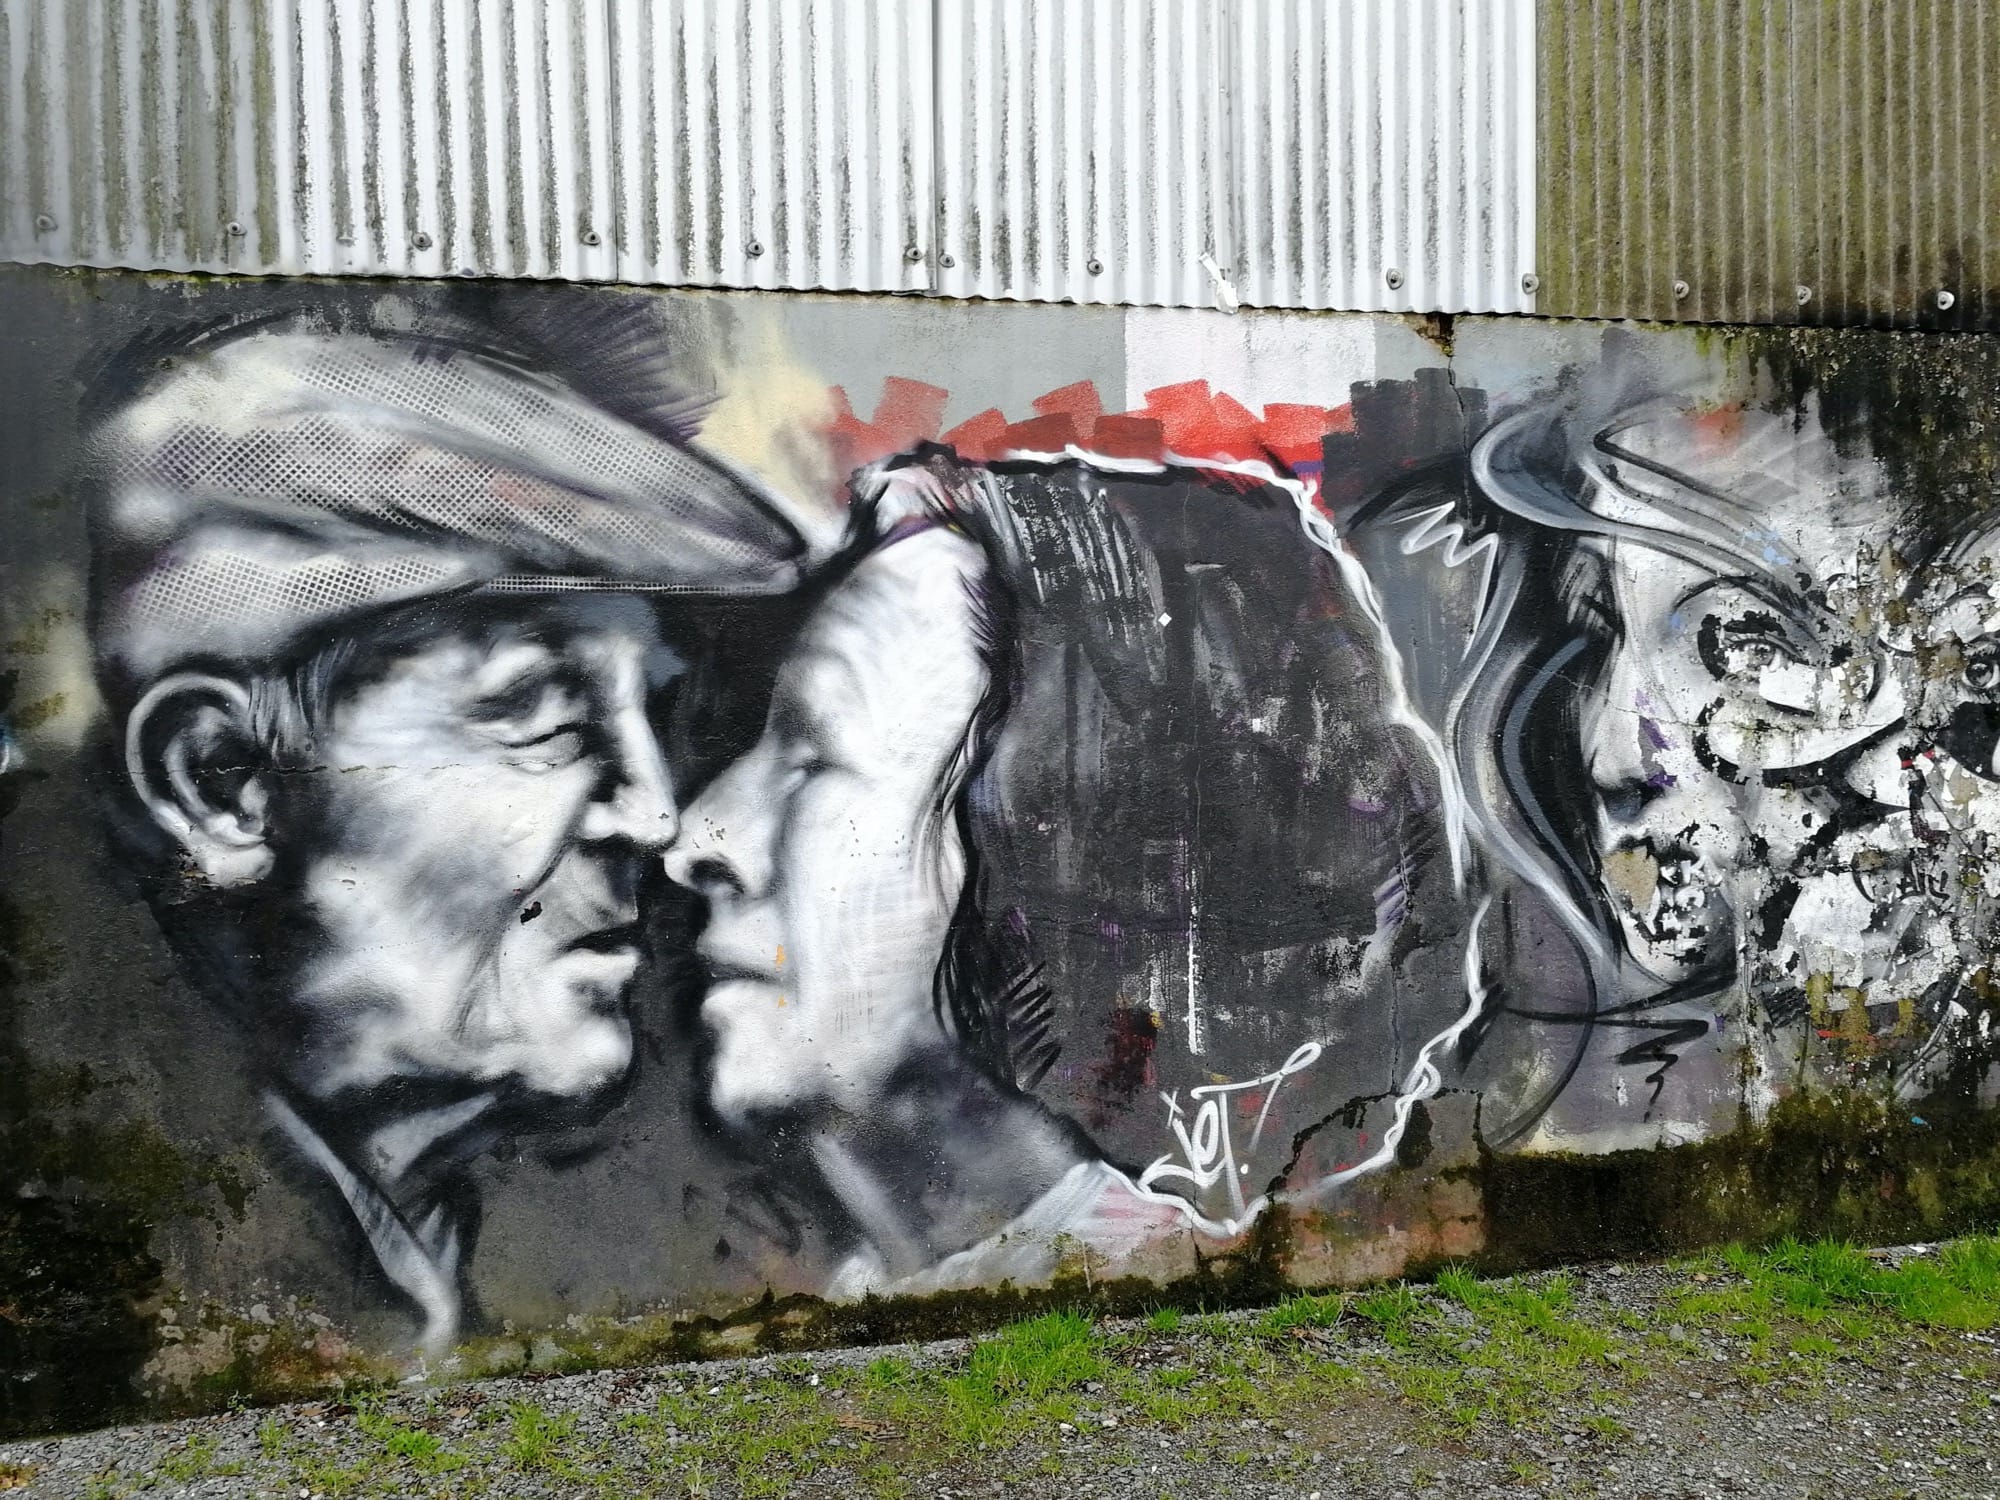 Graffiti 1202  by the artist Jef captured by Rabot in Redon France